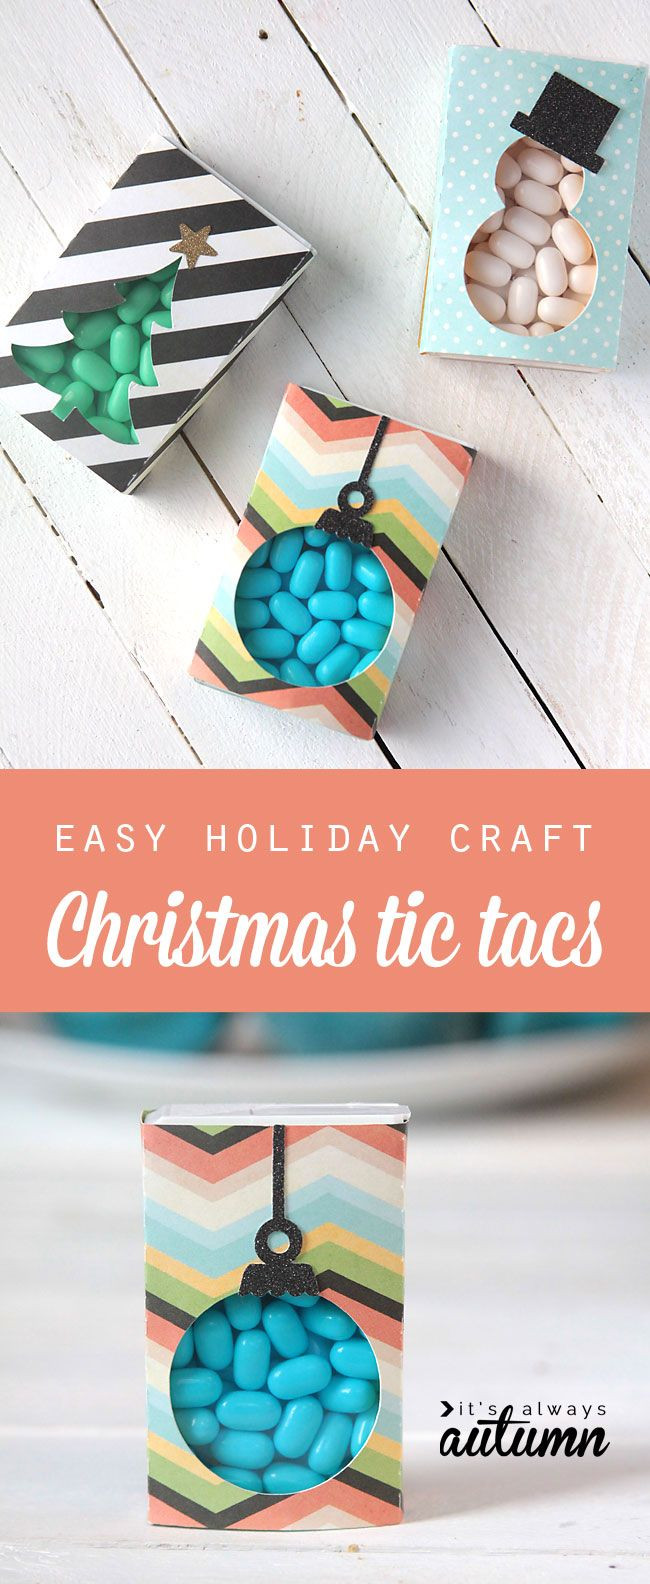 Easy Christmas Craft Gifts
 17 Best images about handmade ts on Pinterest